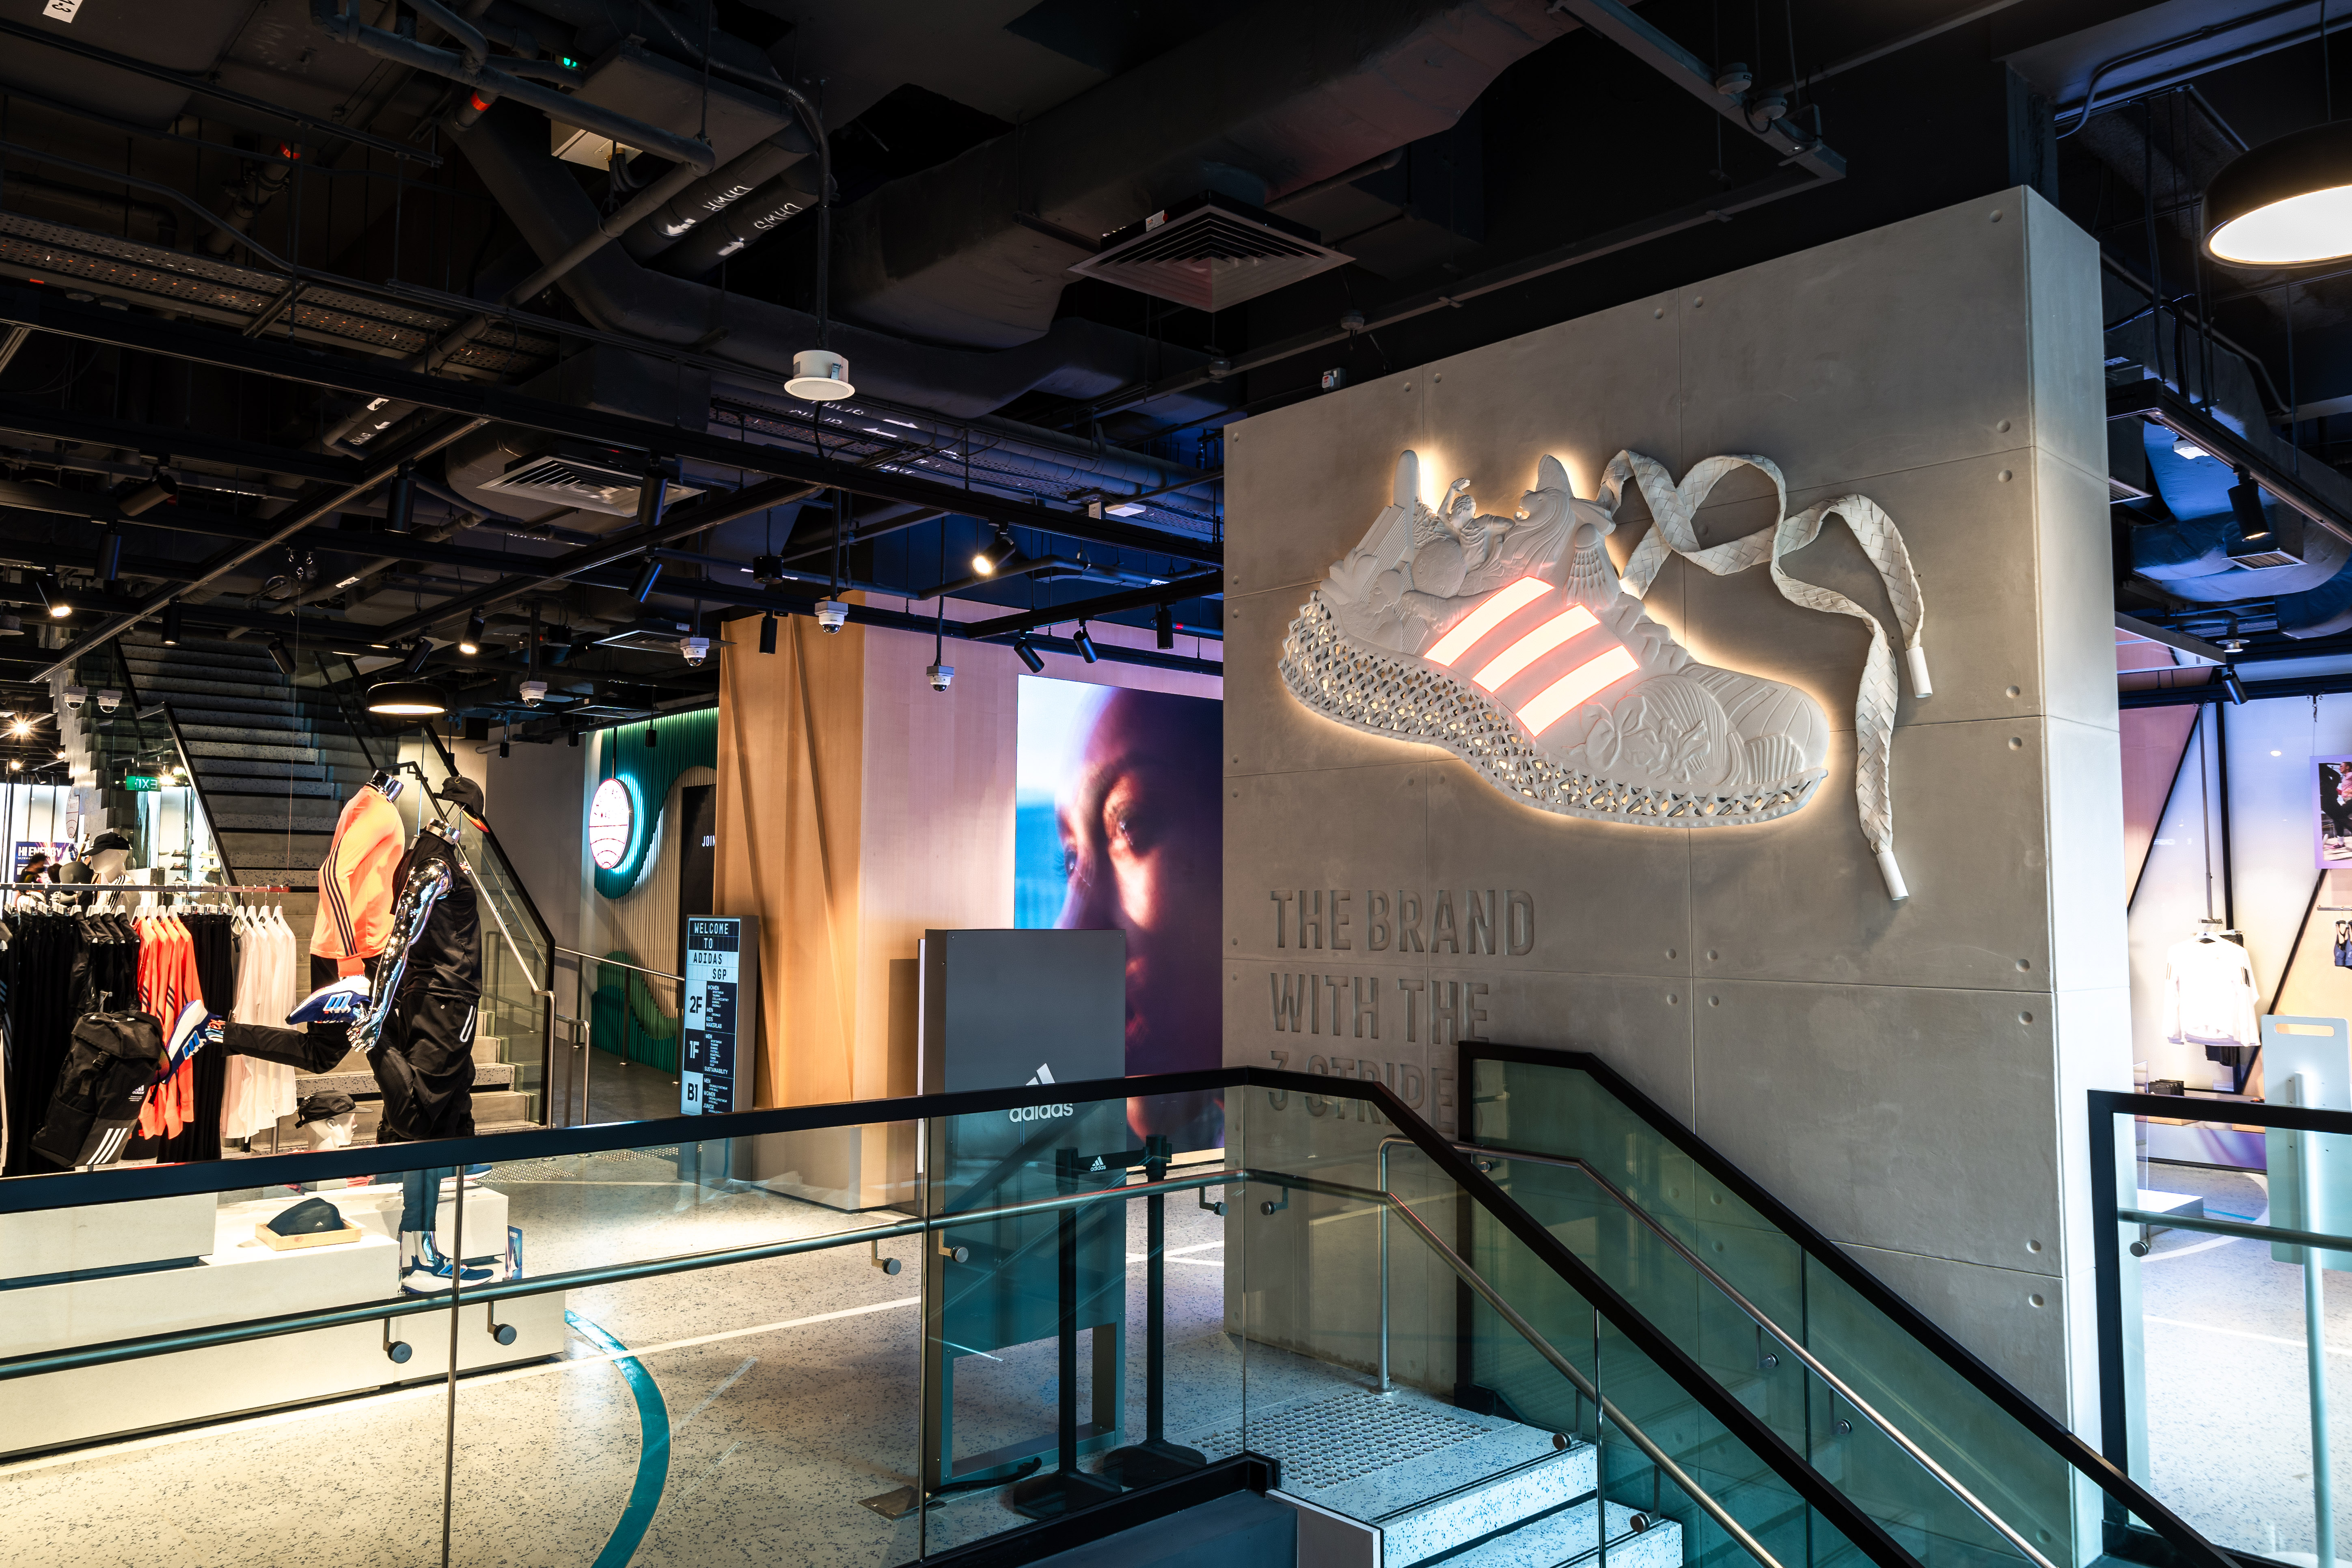 Adidas S'pore launches 1st brand centre Orchard Road with 3 floors & Singapore-inspired elements - Mothership.SG - News from Singapore, Asia and around the world